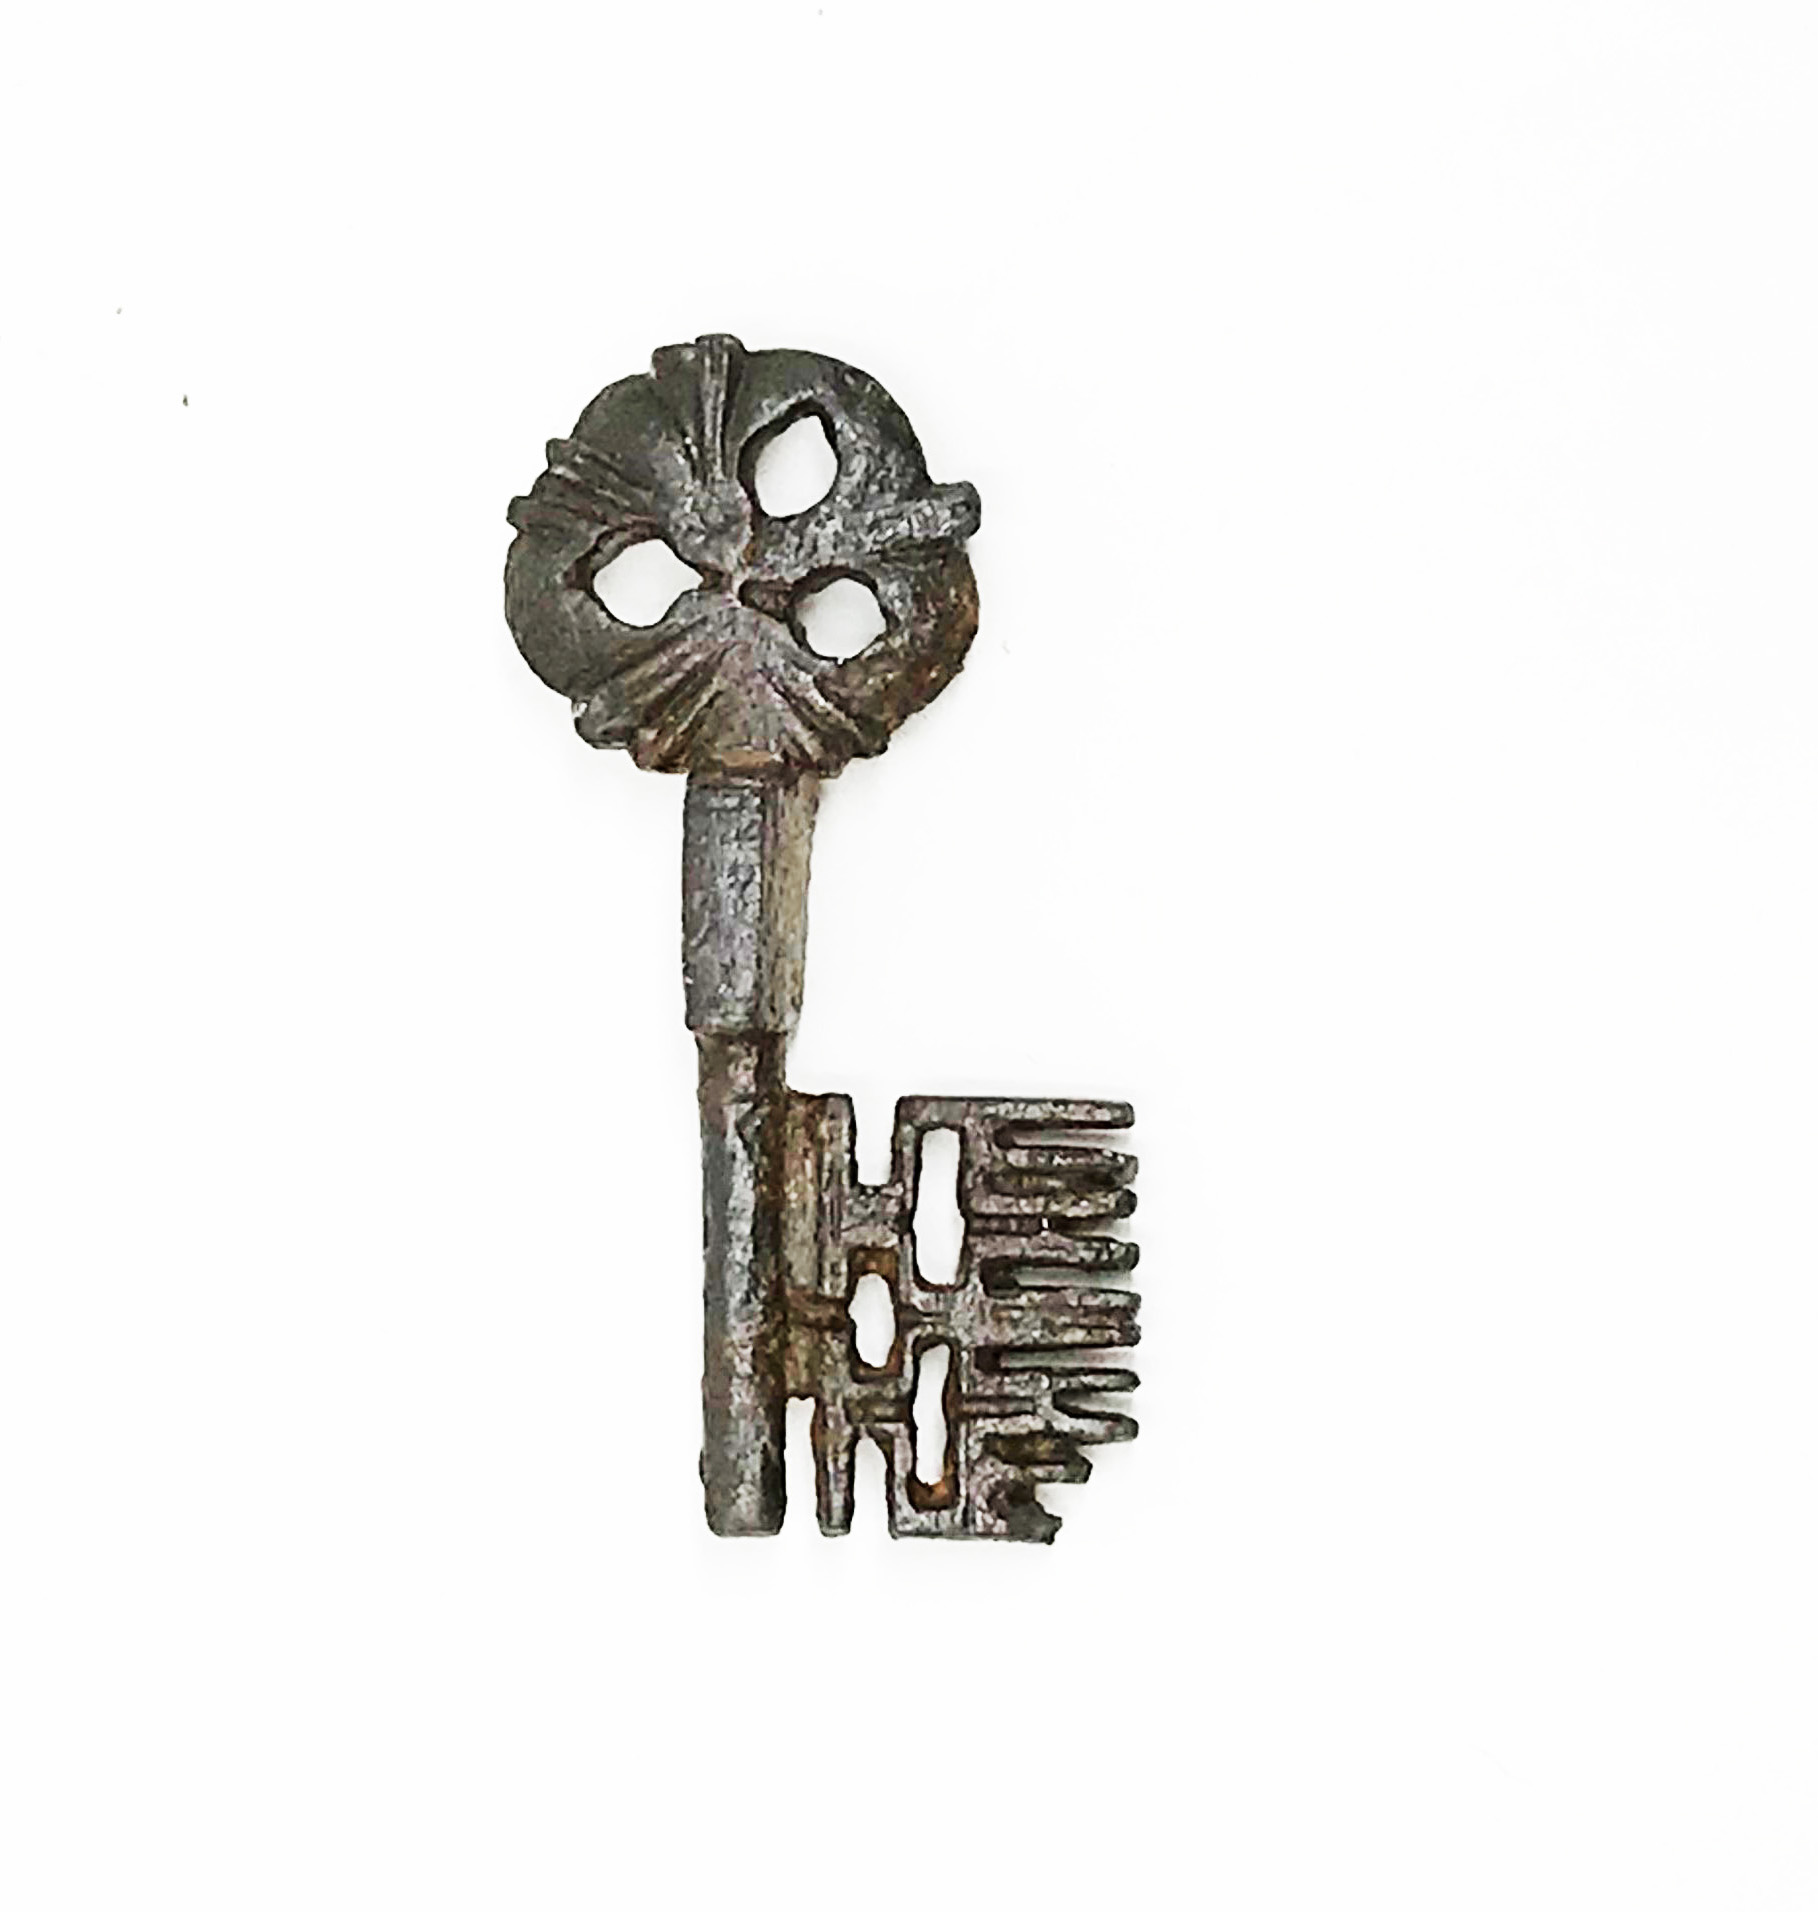 An exceptional gothic iron key, pierced ring, parallelepipedic boss perpendicular to the ring and to